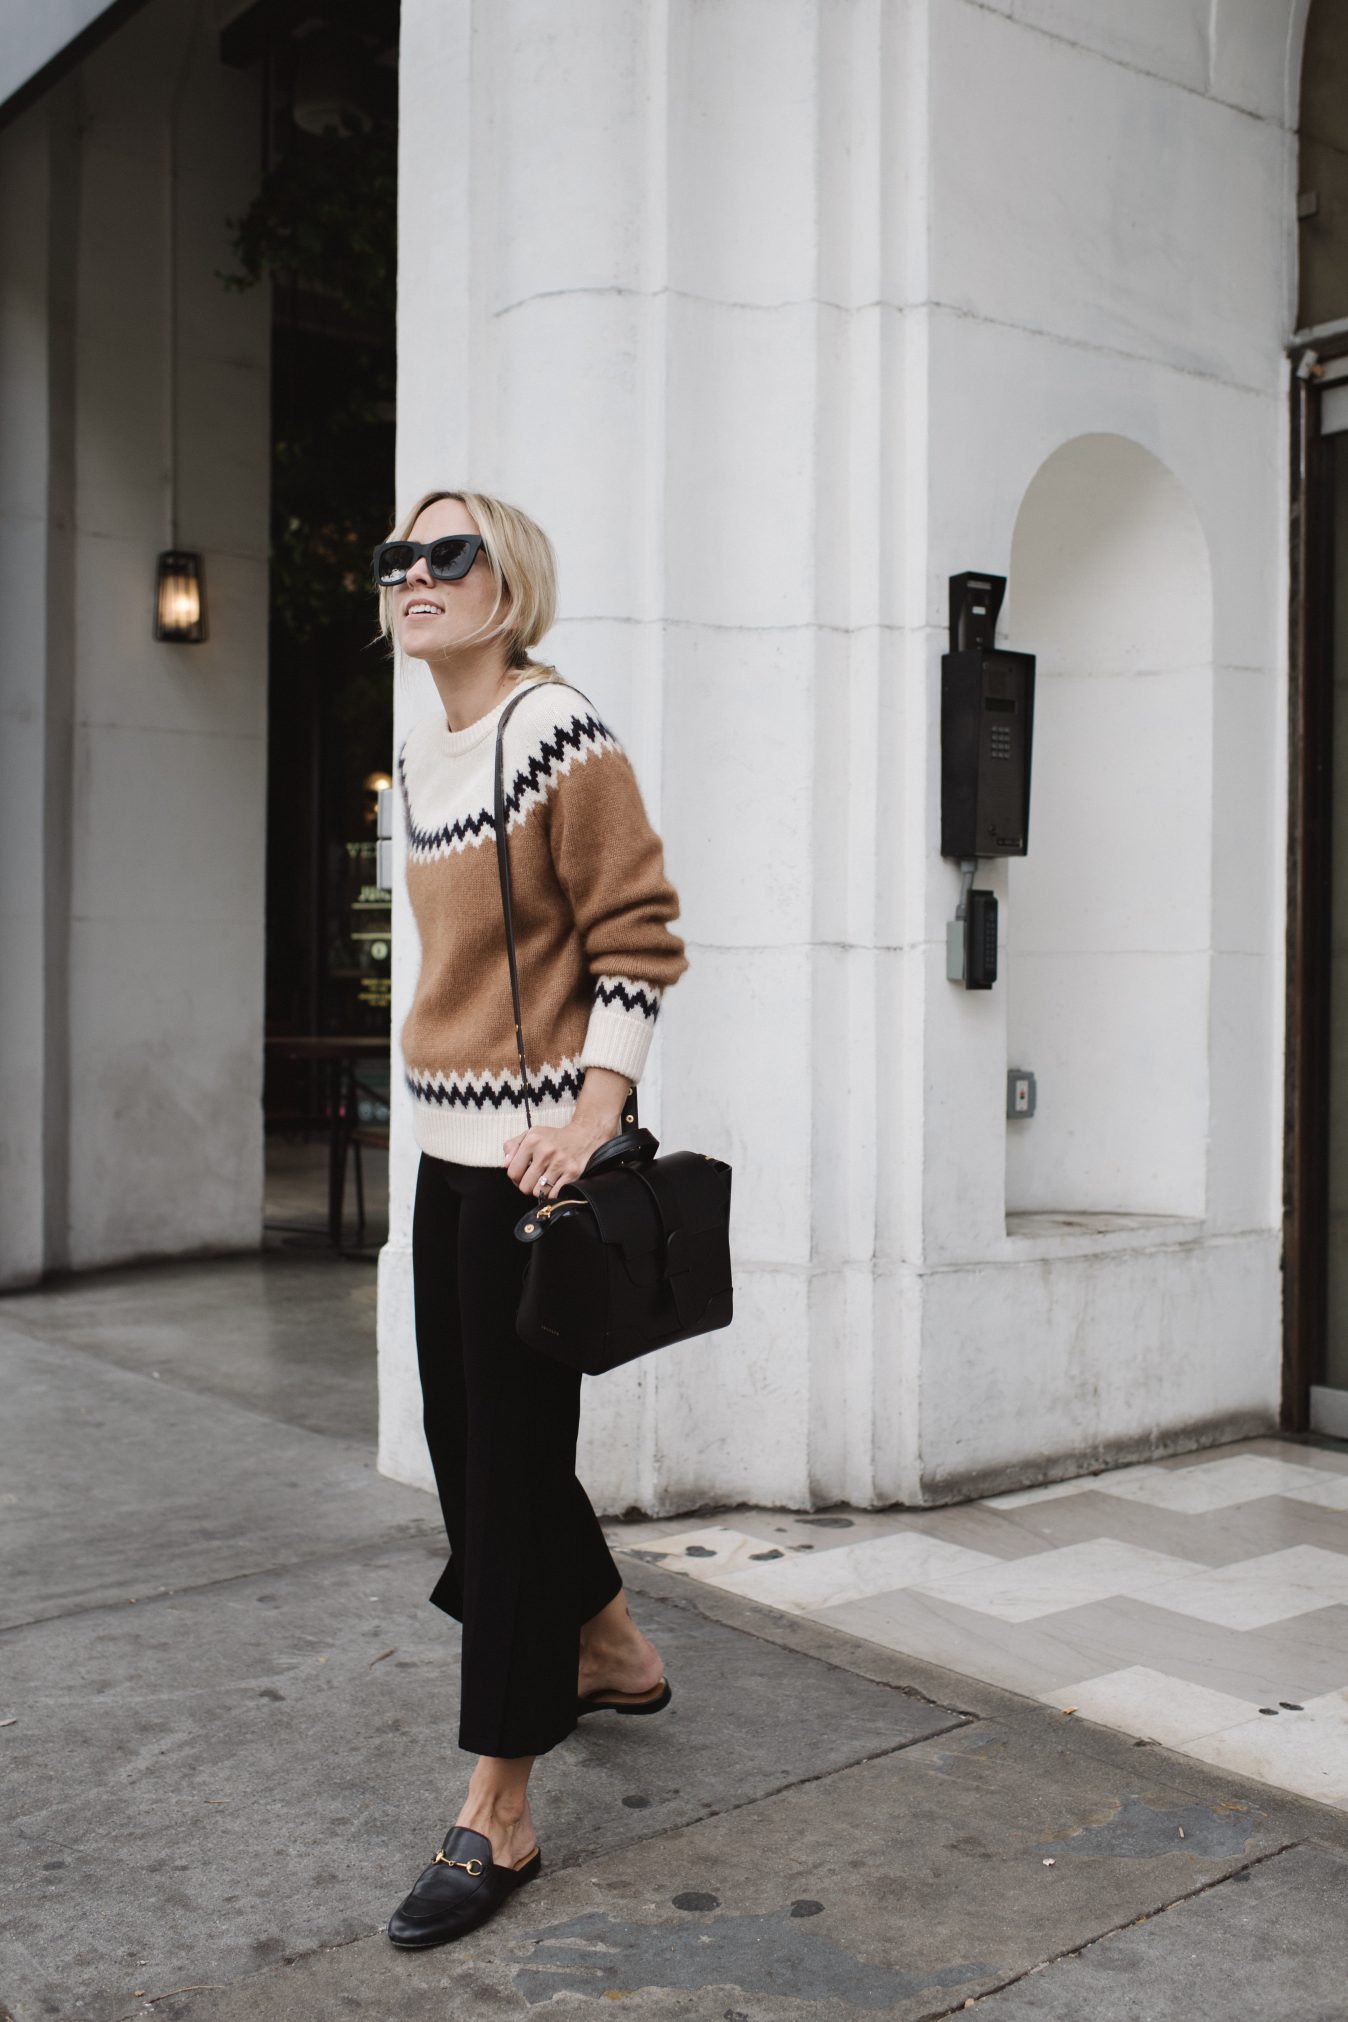 Transitioning Into Fall with Tory Burch - Damsel In Dior